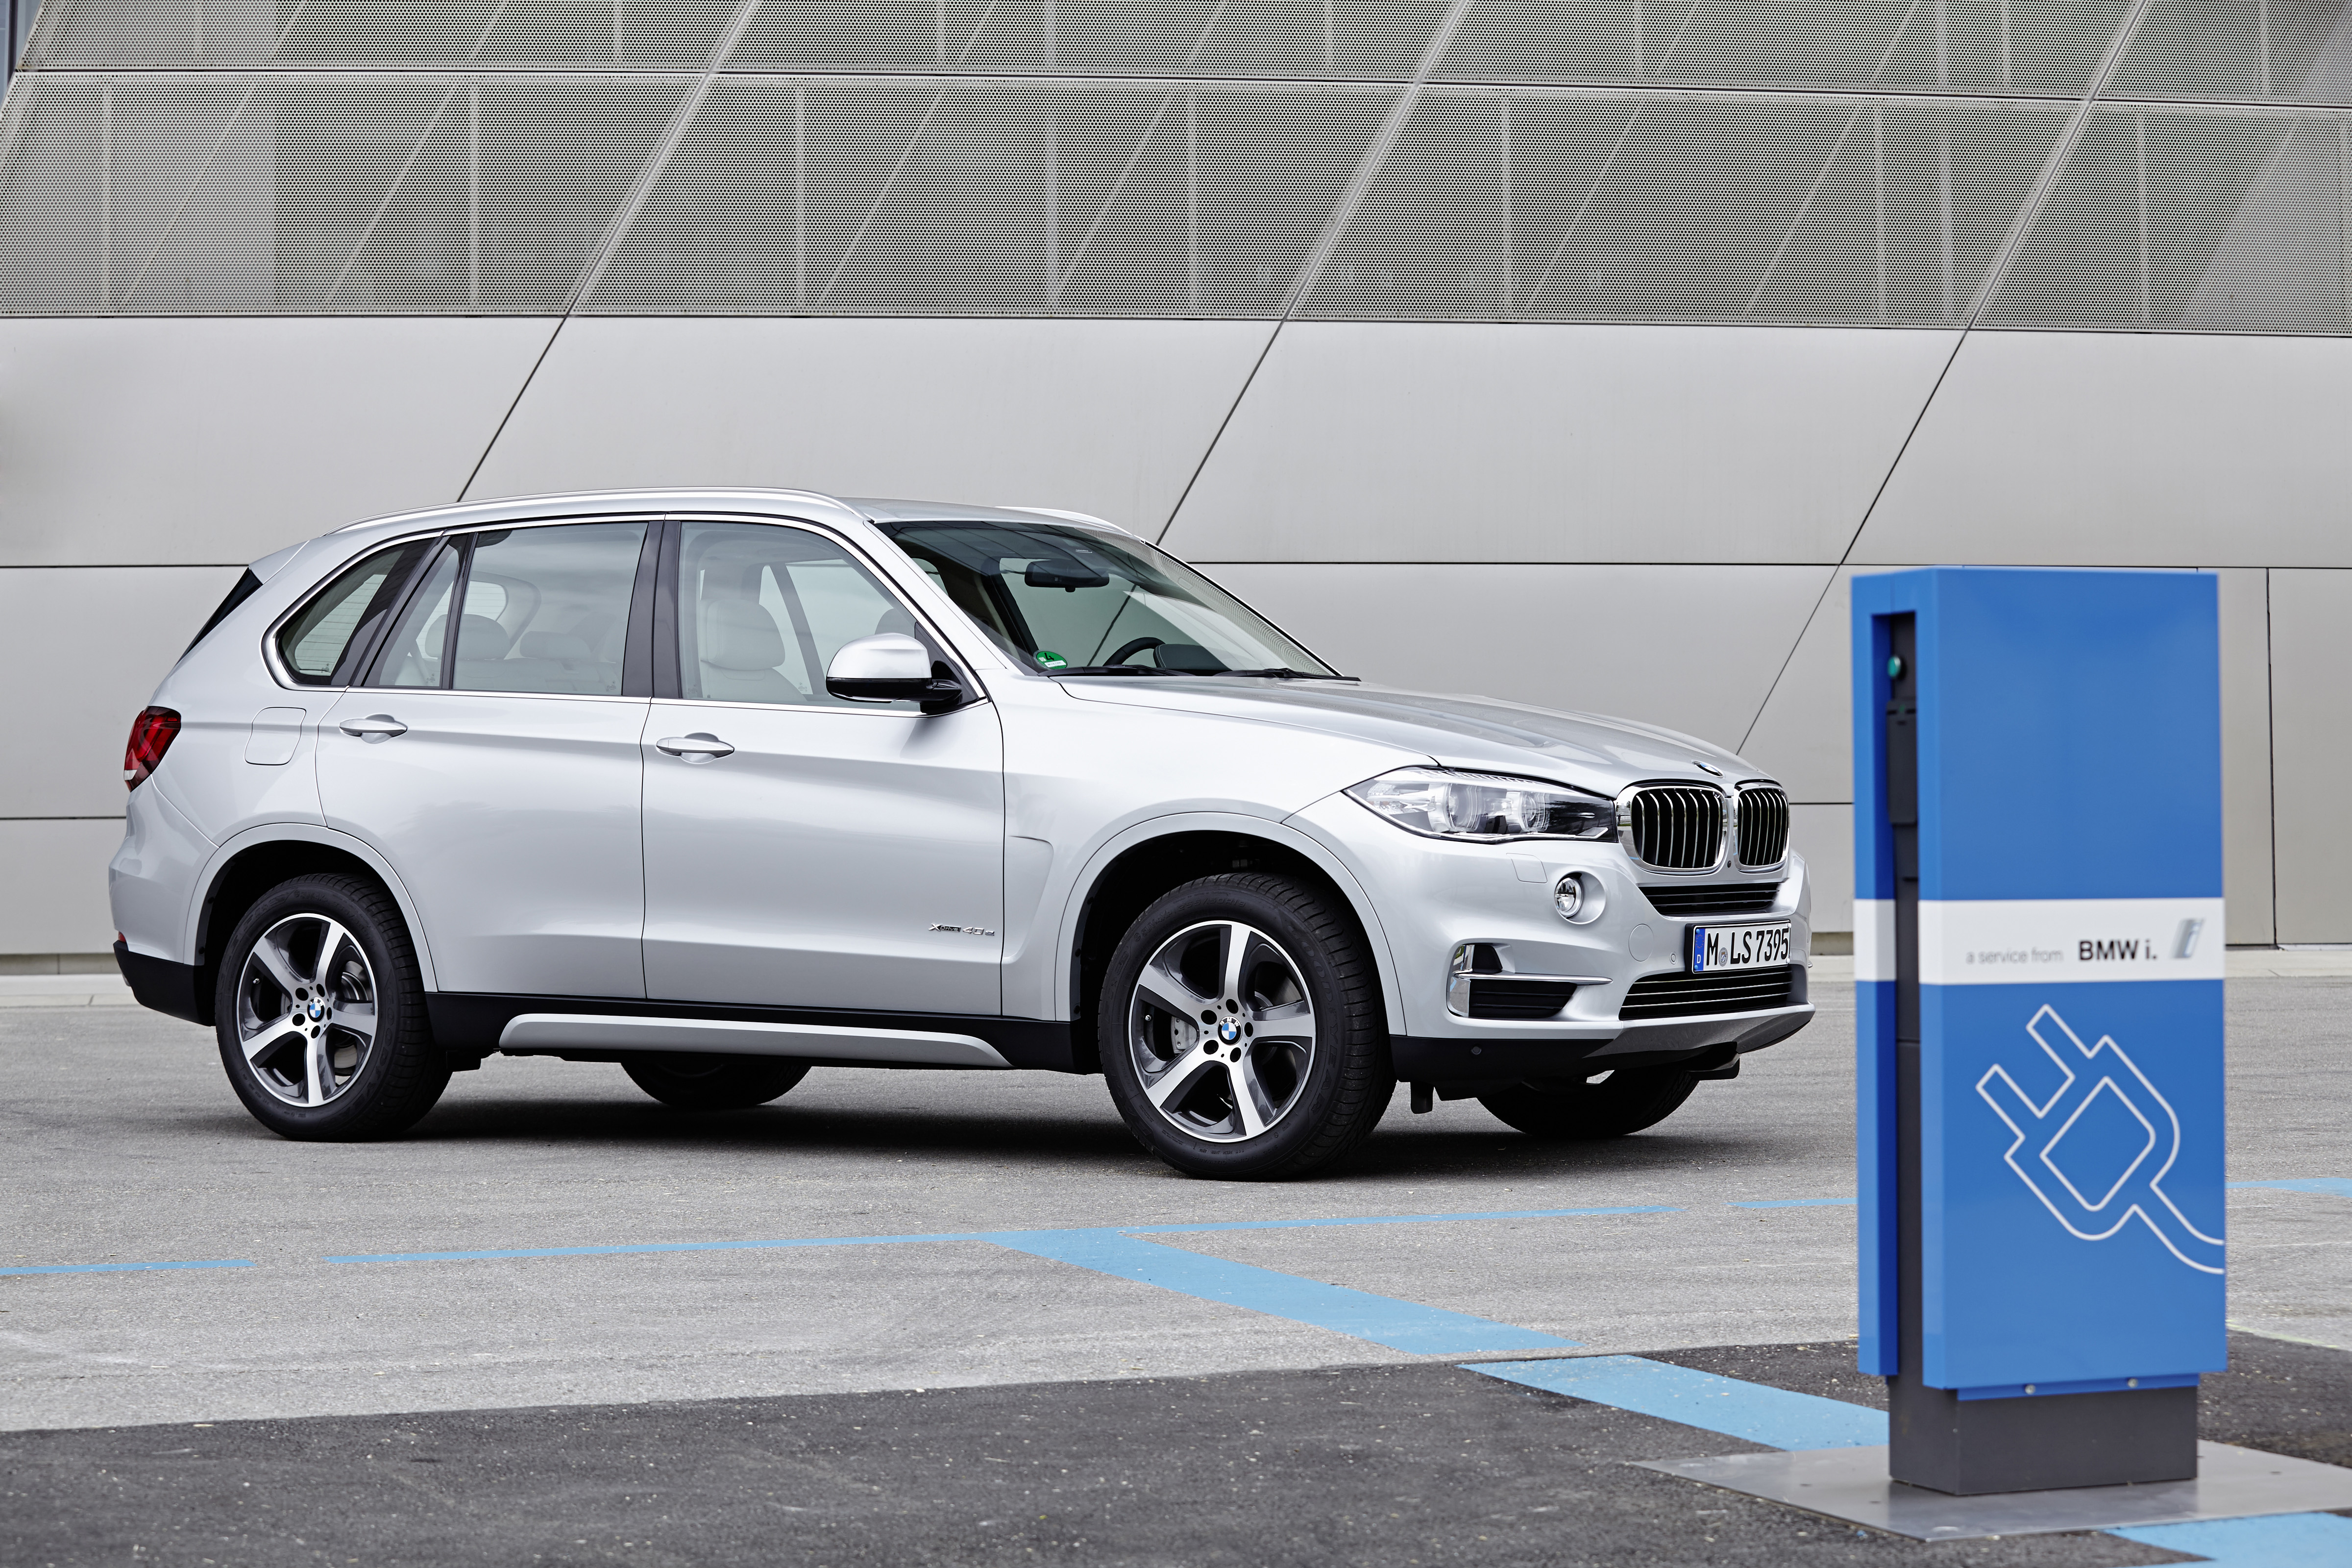 The new BMW X5 with eDrive